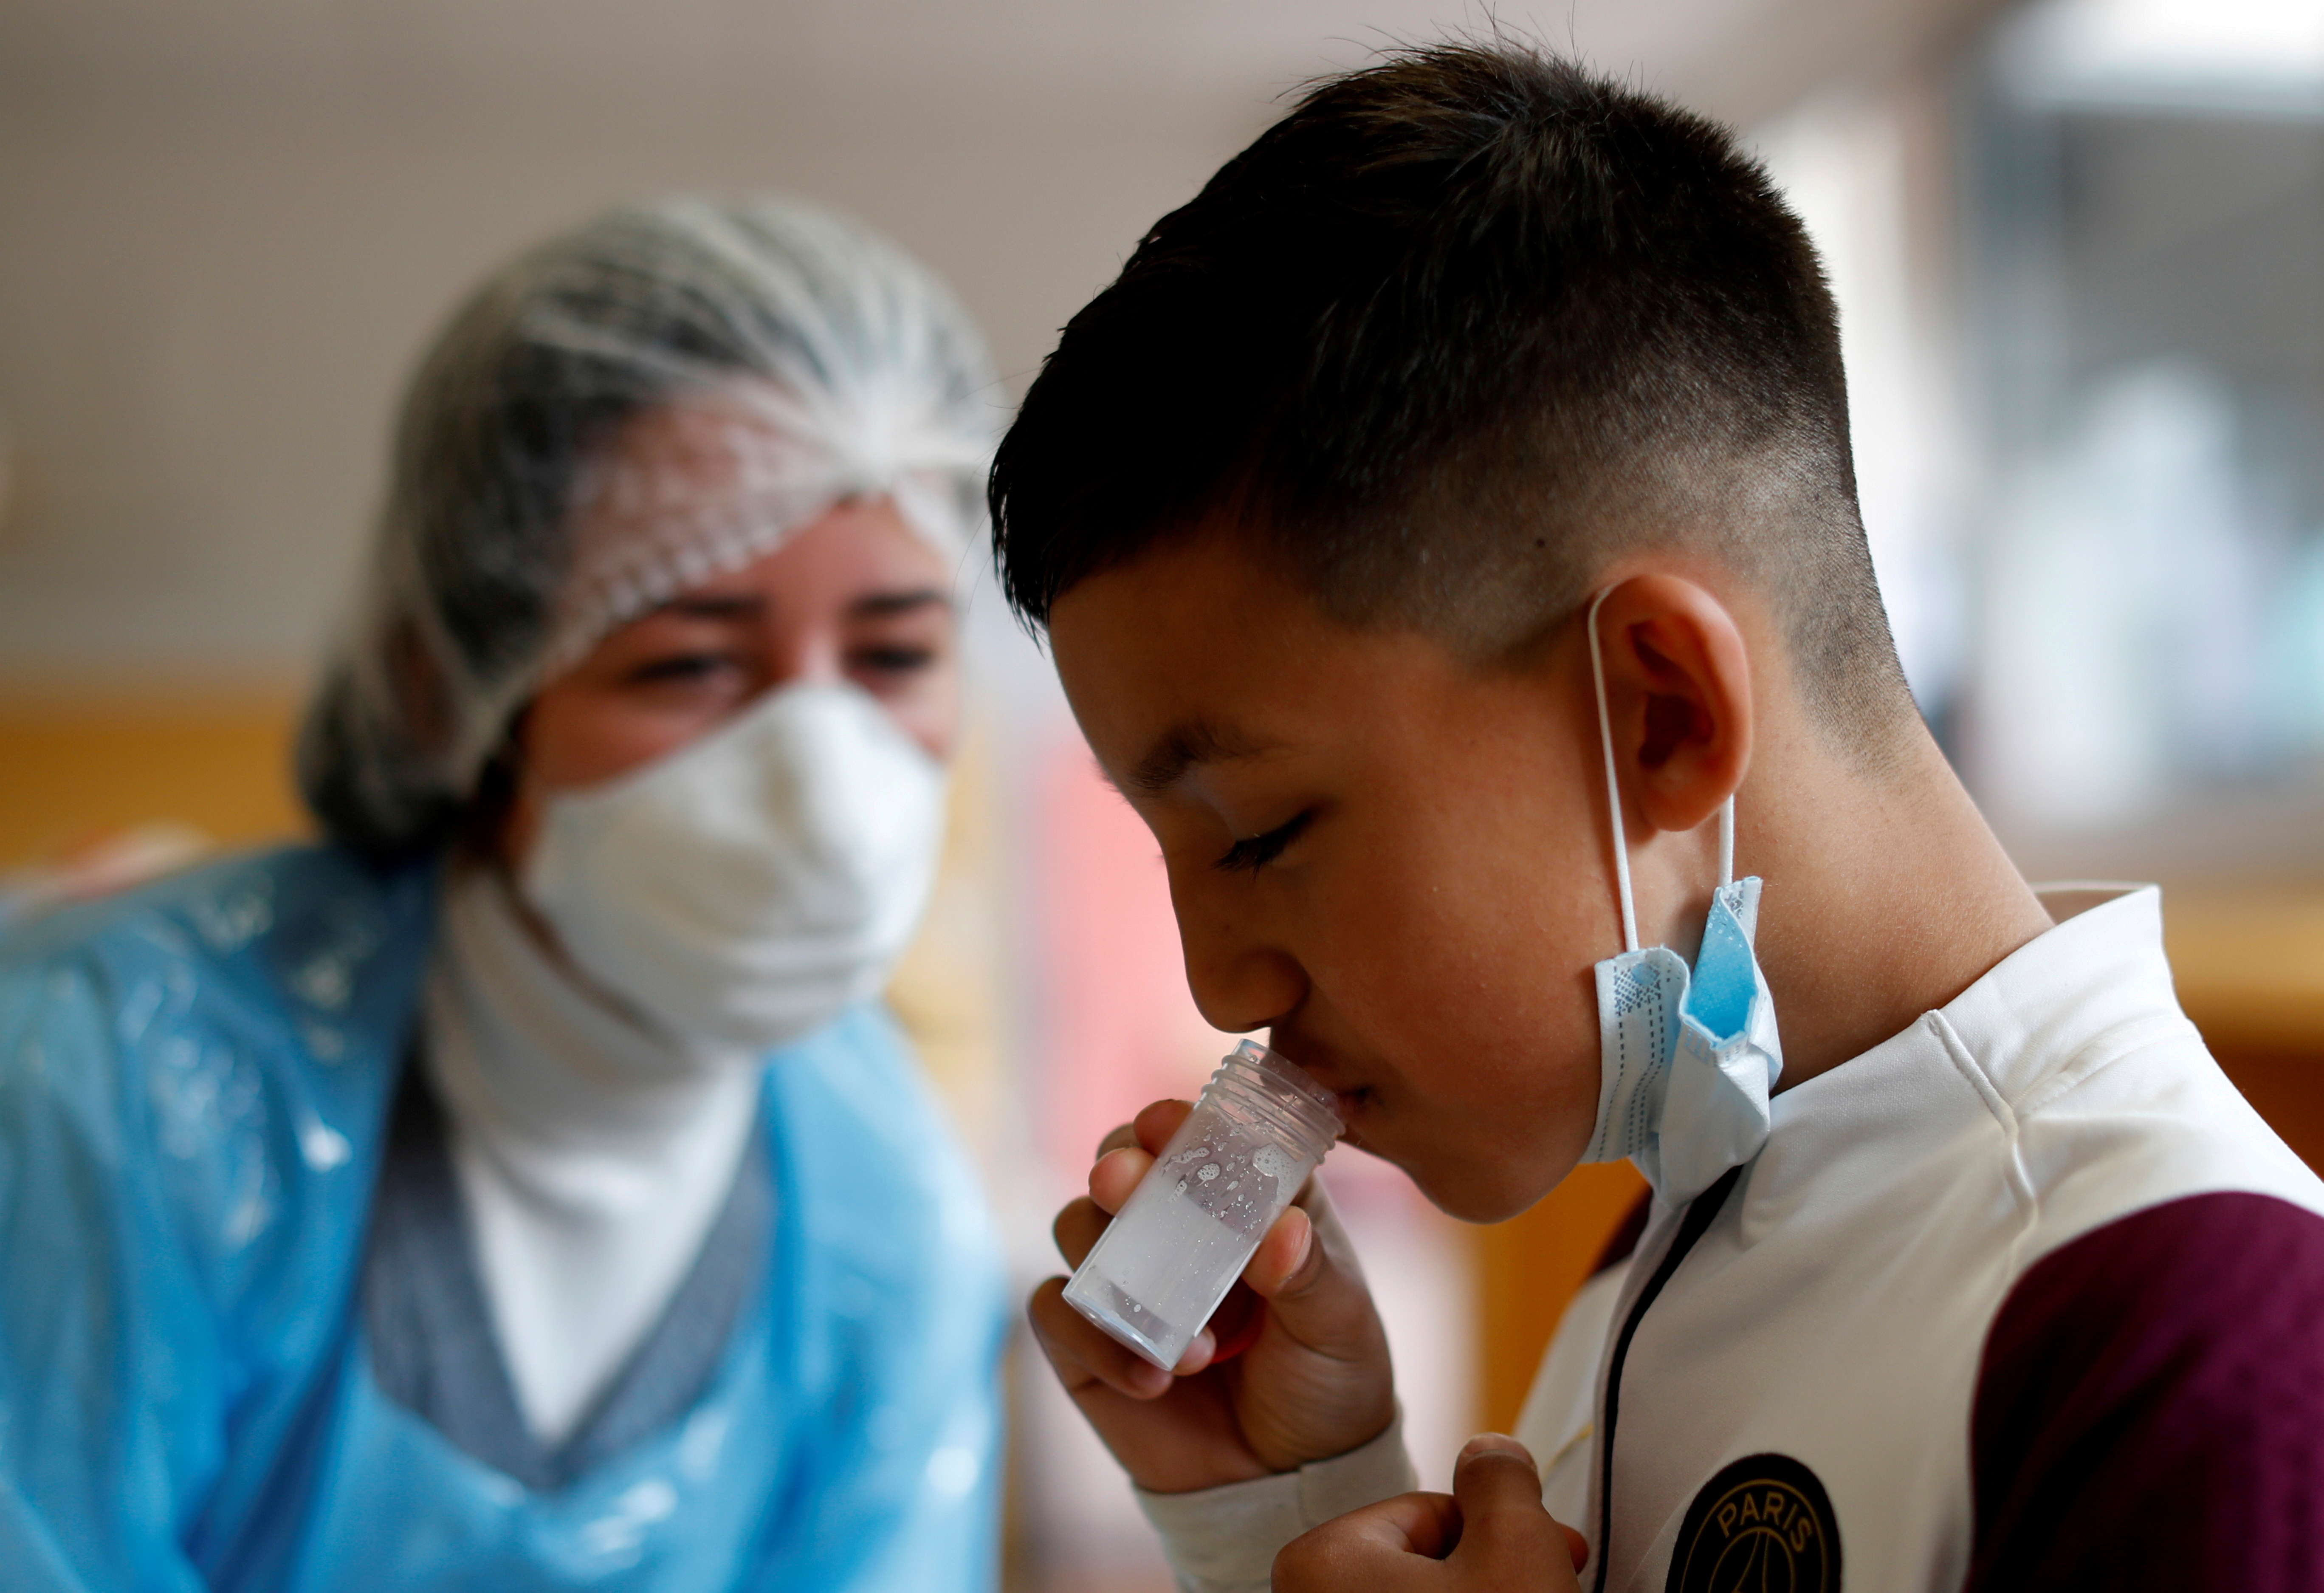 A schoolboy gives a sample during a COVID-19 saliva test at Lepeltier primary school in La Trinite, near Nice, amid the coronavirus disease (COVID-19) outbreak in France, April 26, 2021.    REUTERS/Eric Gaillard/File Photo